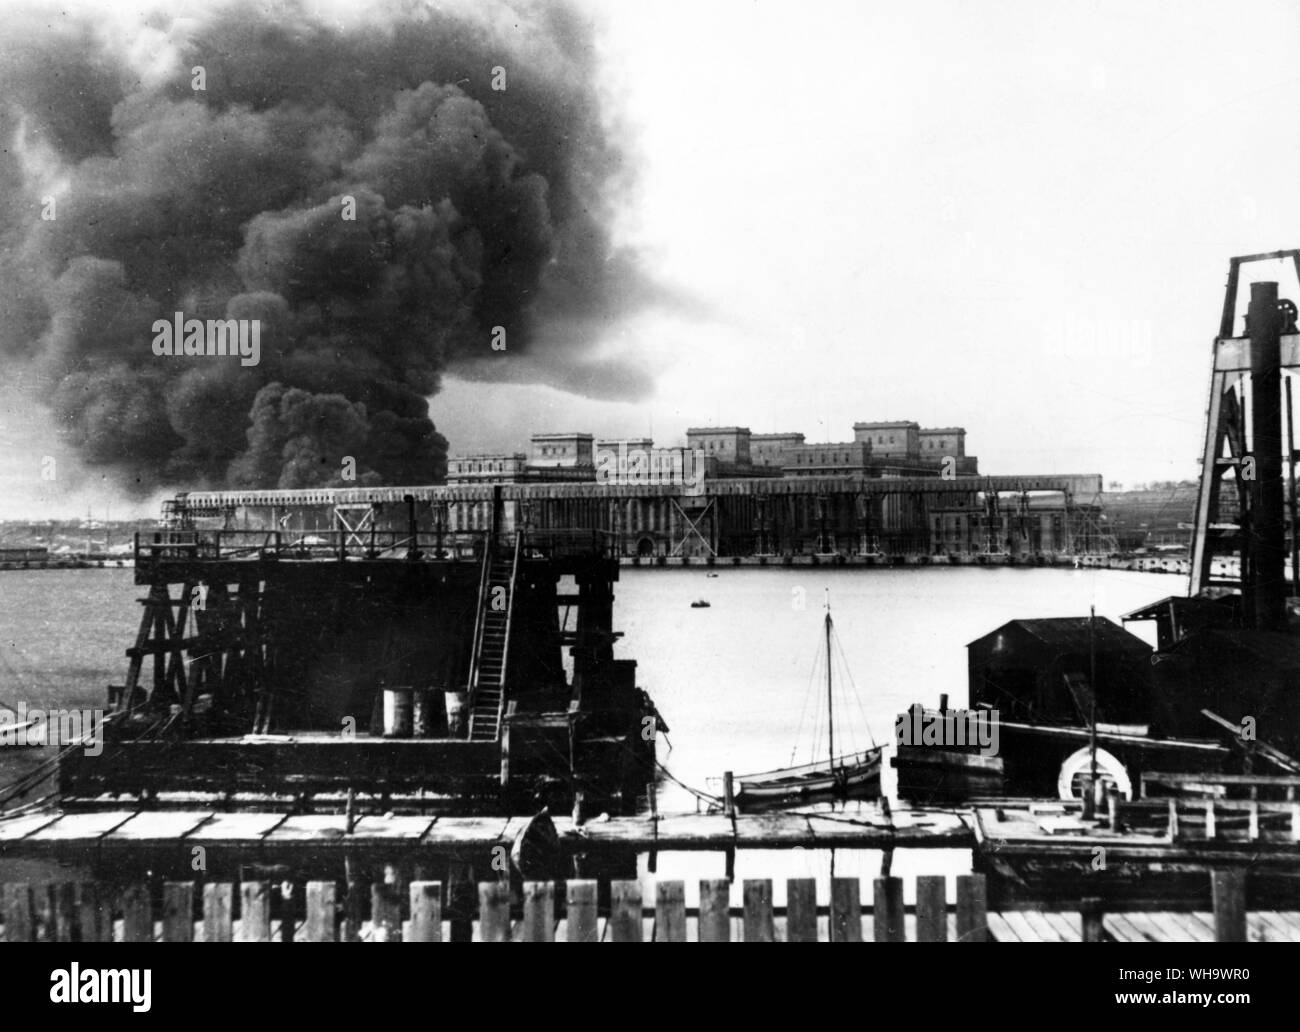 WW1, 1916: The Balkans. Petrol tanks burning in the harbour of Constanta, evacuated by the Romanians on 22nd October 1916. Occupied by Germano-Bulgars, 23rd October 1916. Fire burning near huge grain stores. Stock Photo